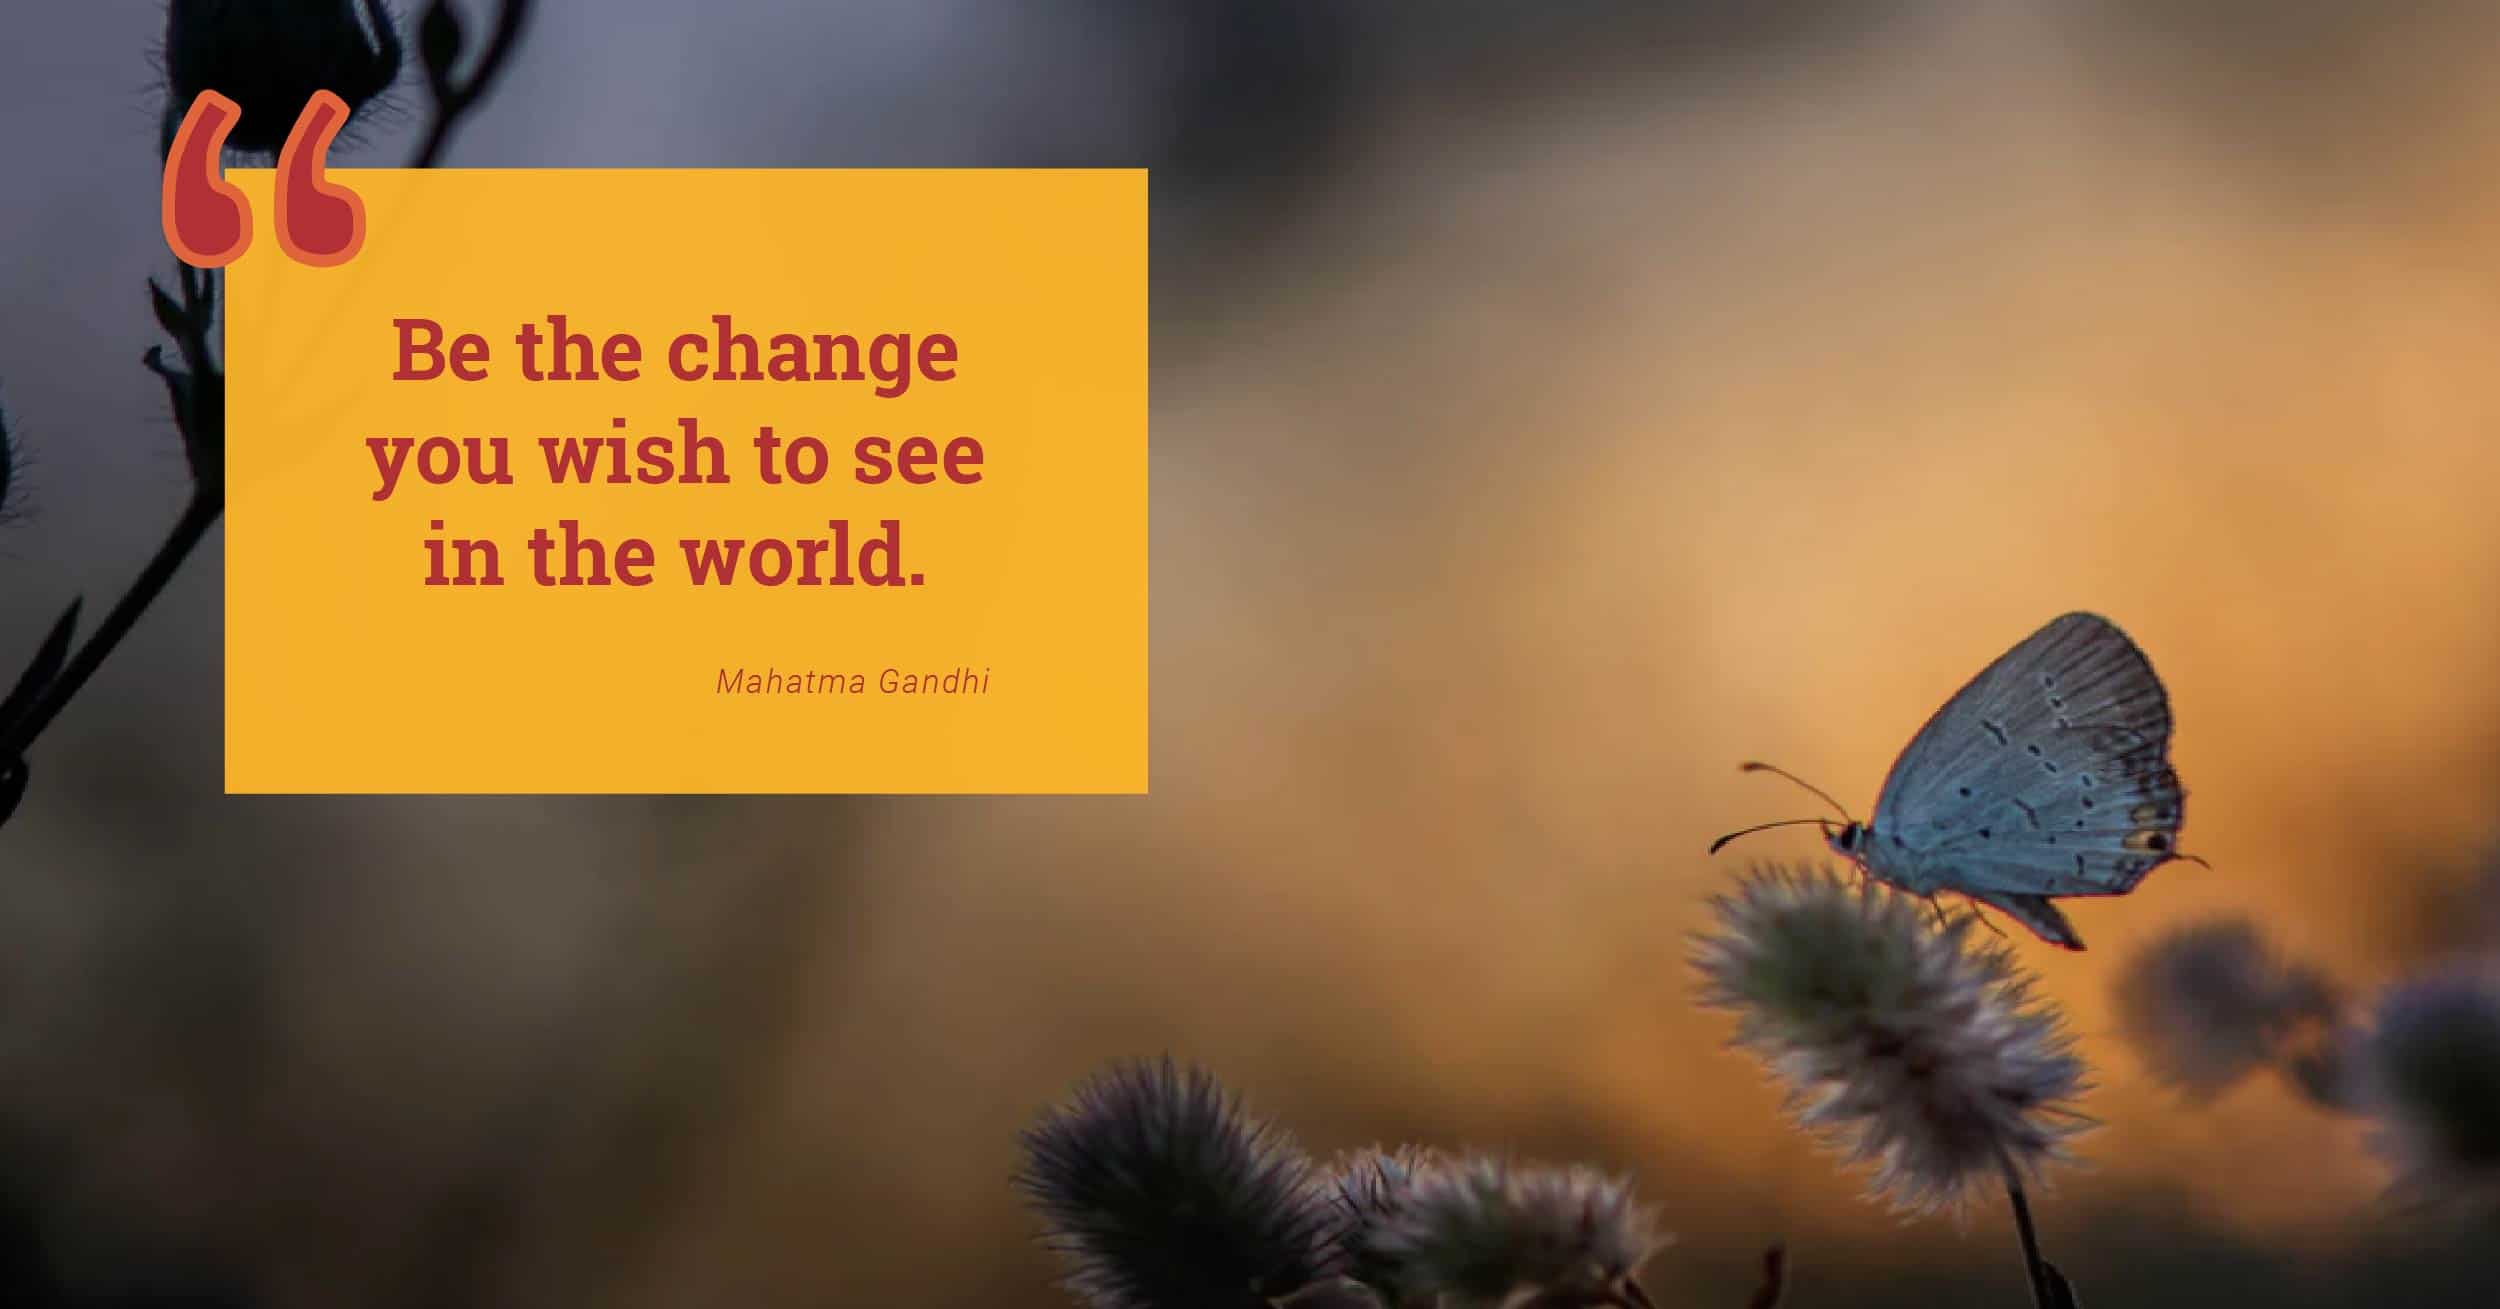 butterfly on flower at sunset with quote by Gandhi "Be the wish you wish to see in the world"